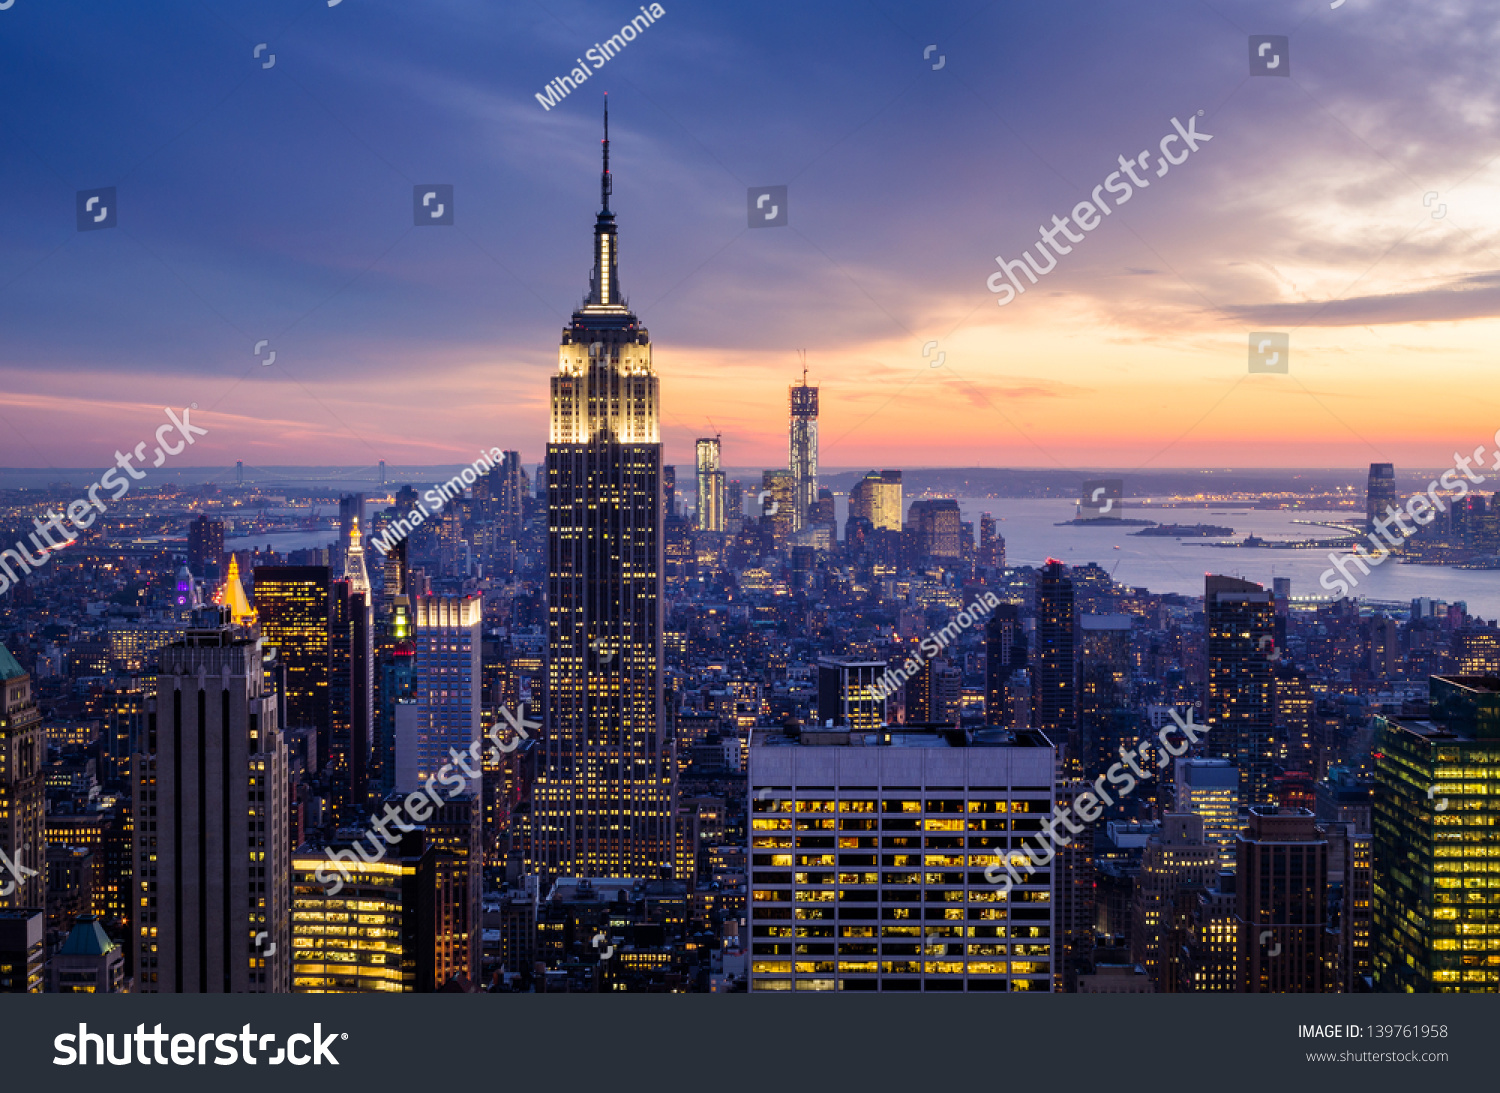 New York City with skyscrapers at sunset #139761958